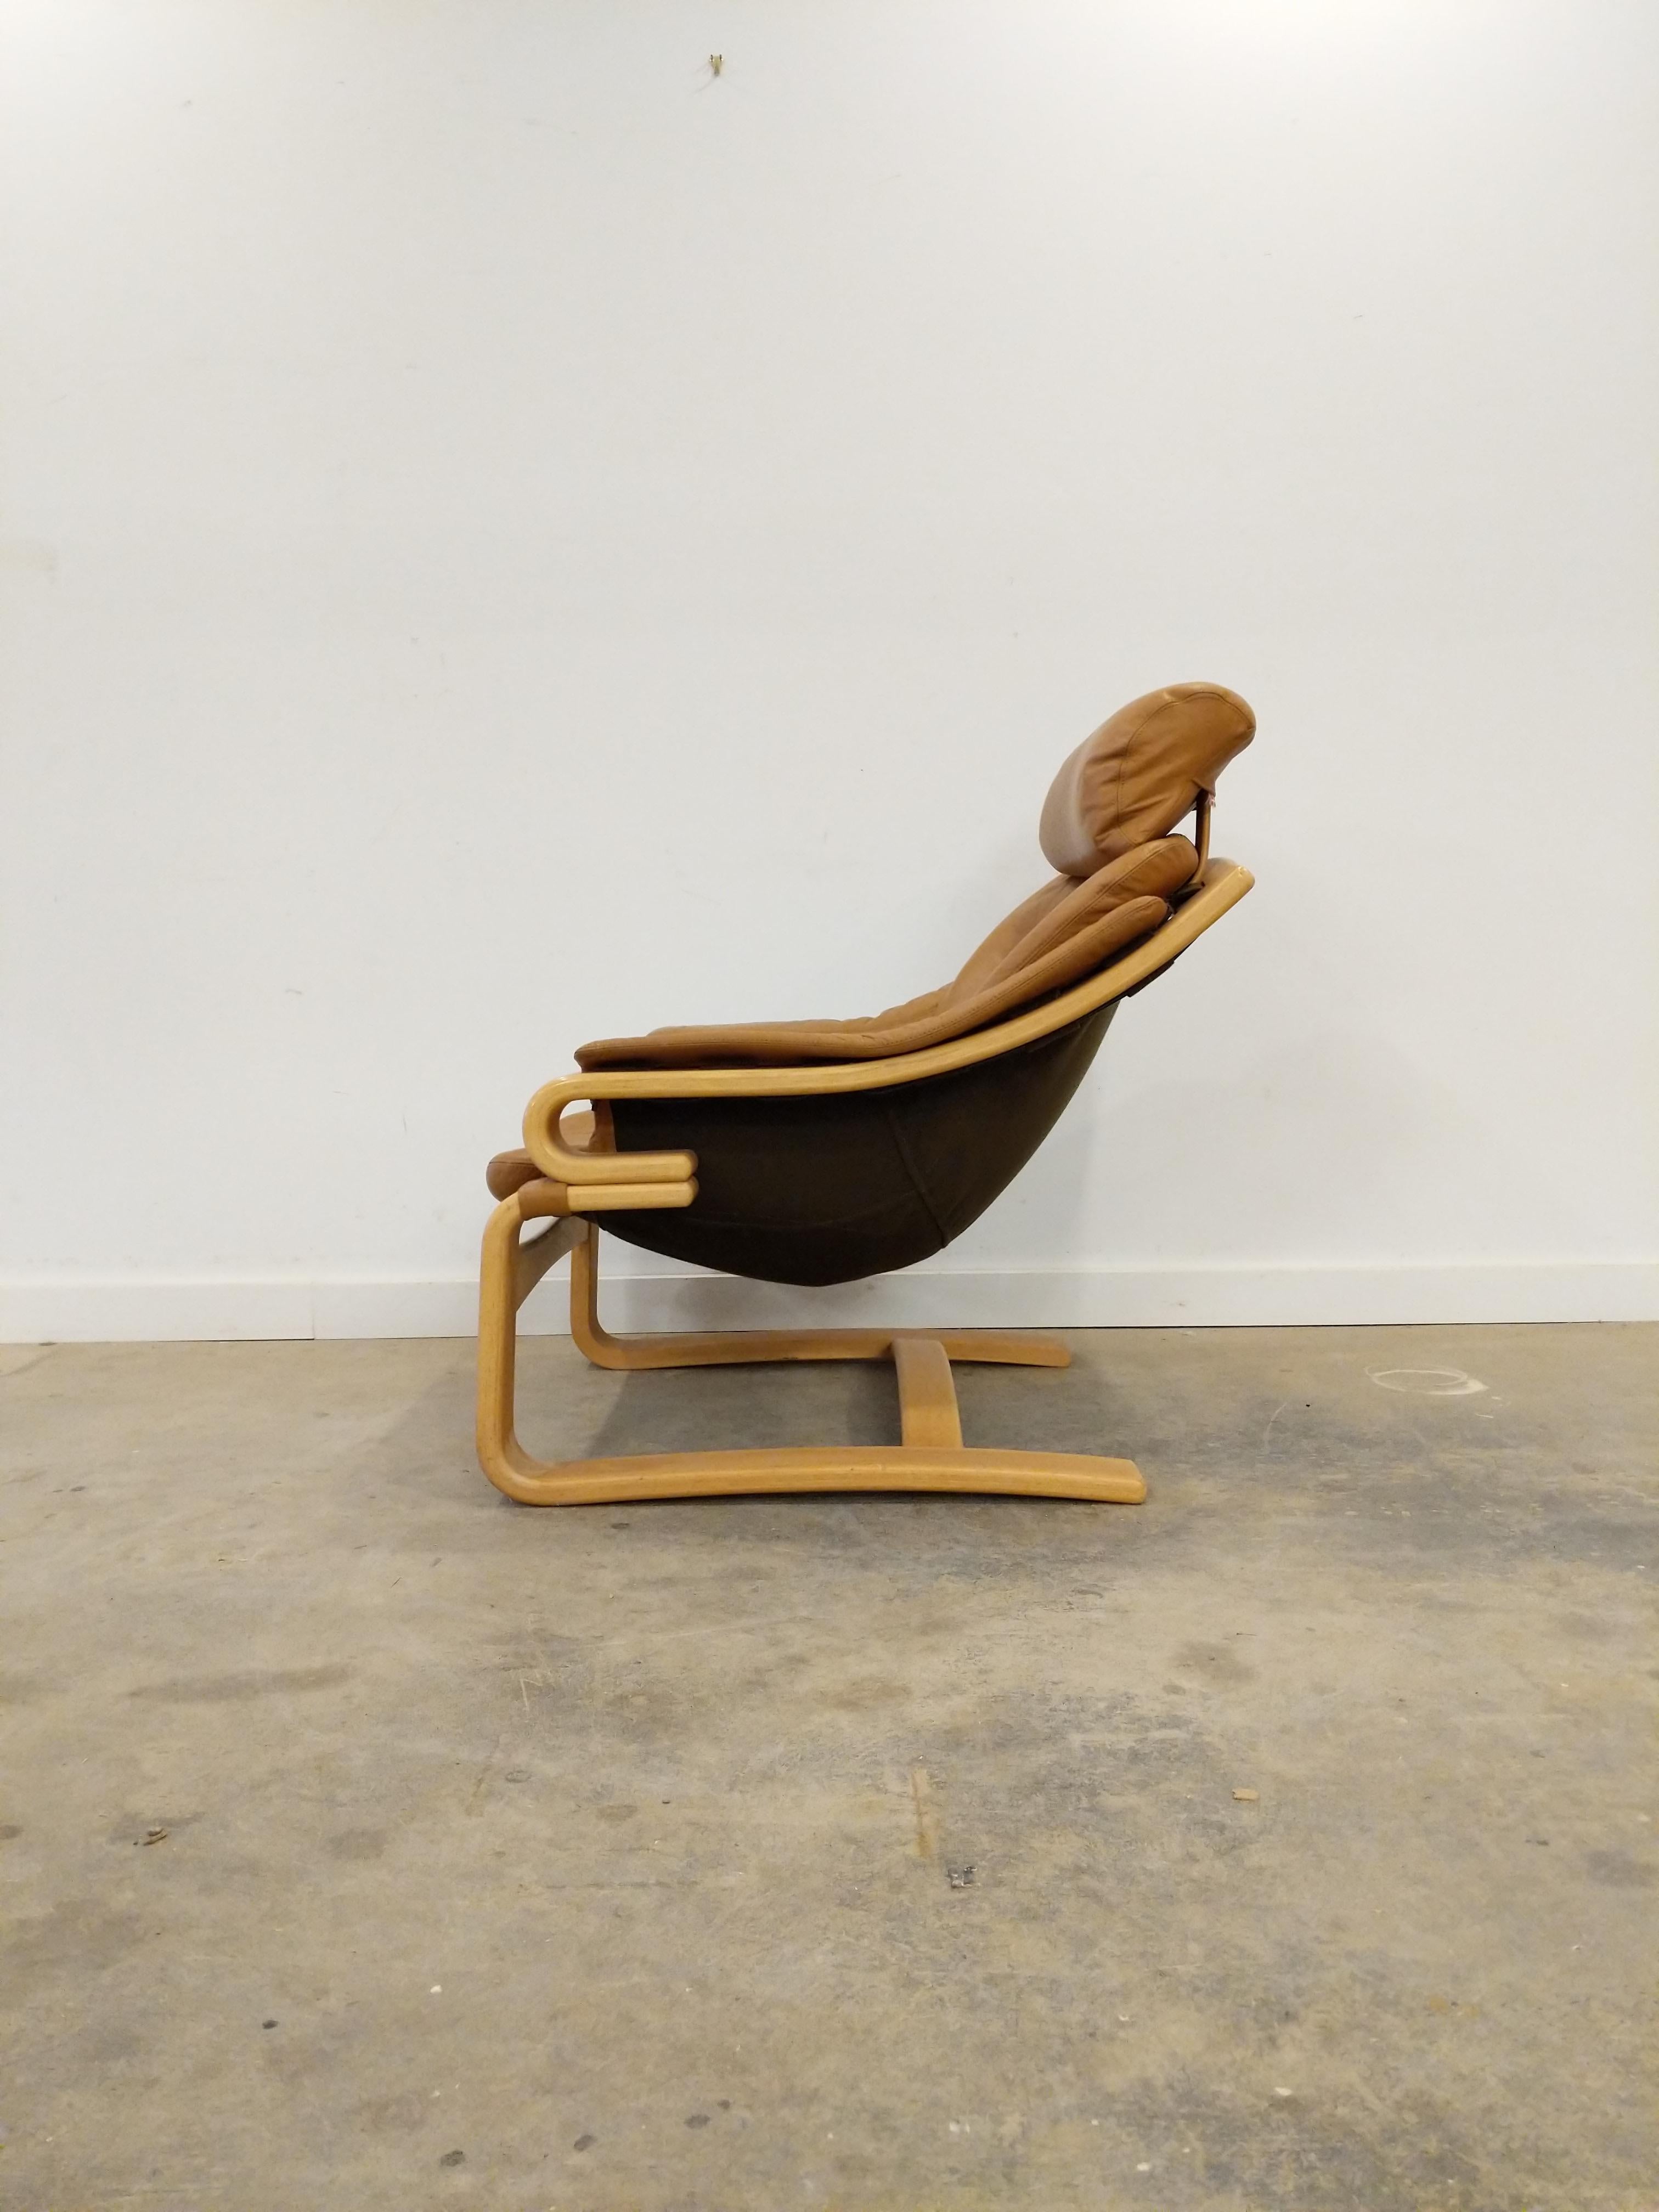 Authentic vintage mid century Danish / Scandinavian Modern lounge chair / recliner with footstool.

